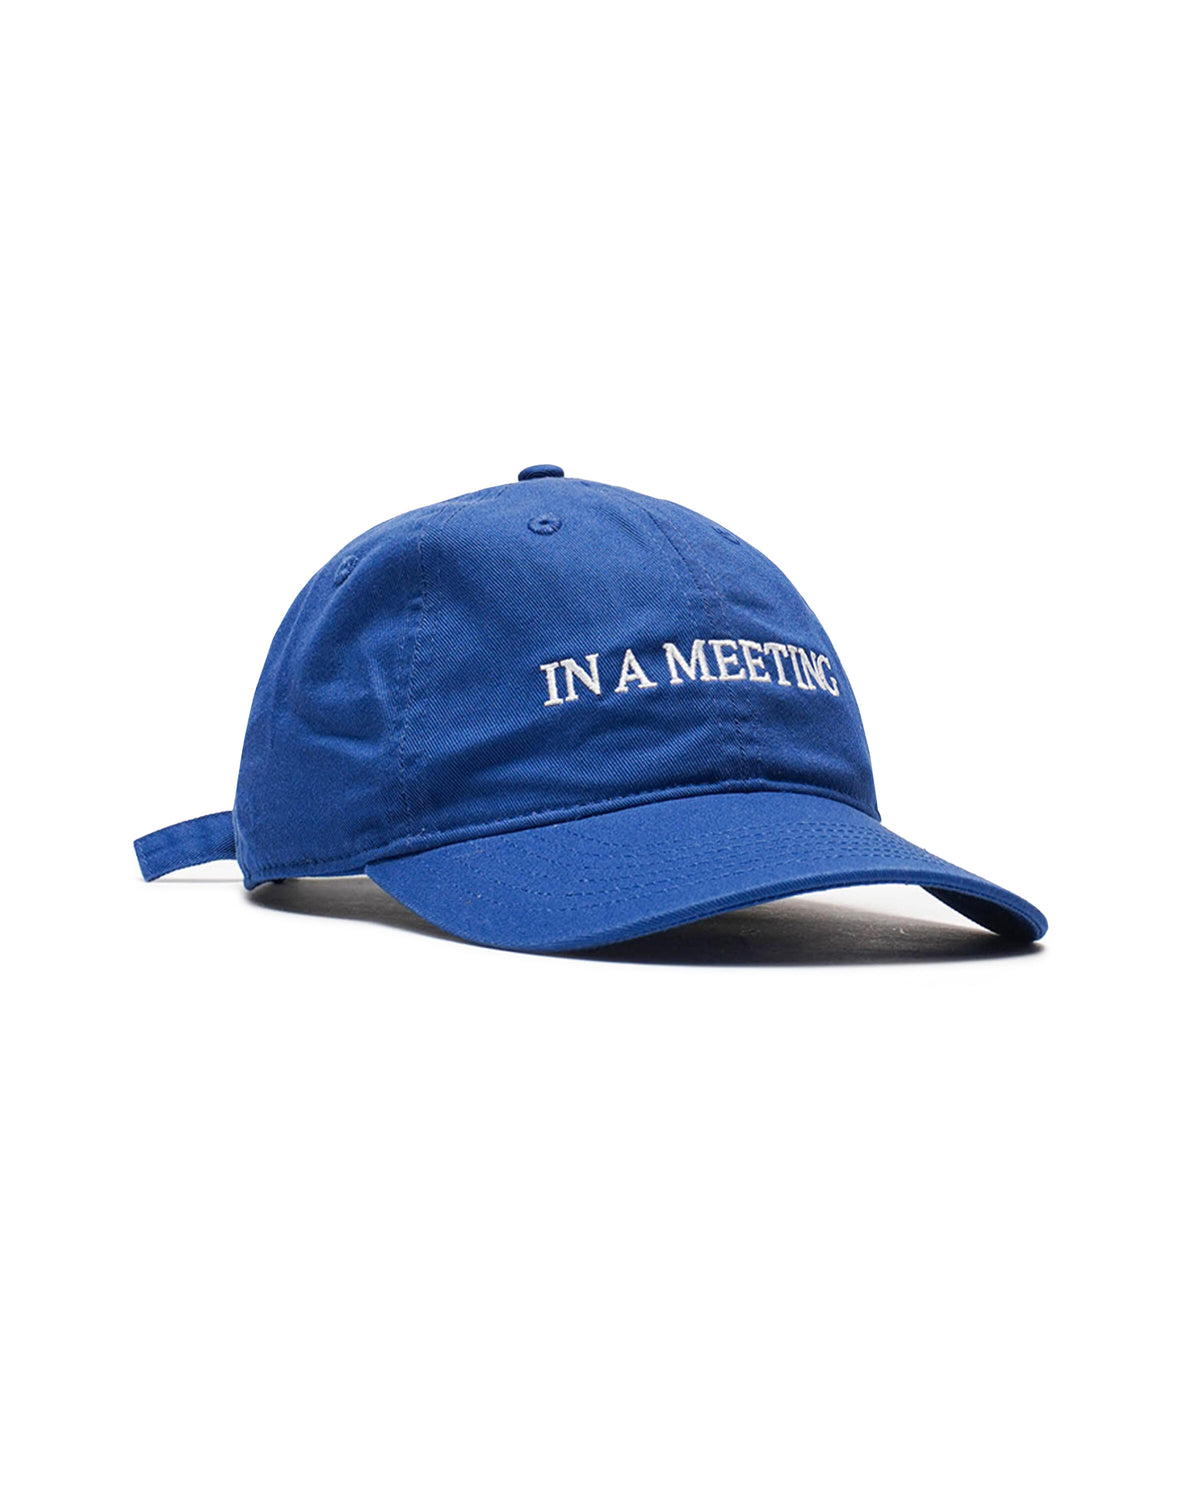 IDEA IN A MEETING HAT